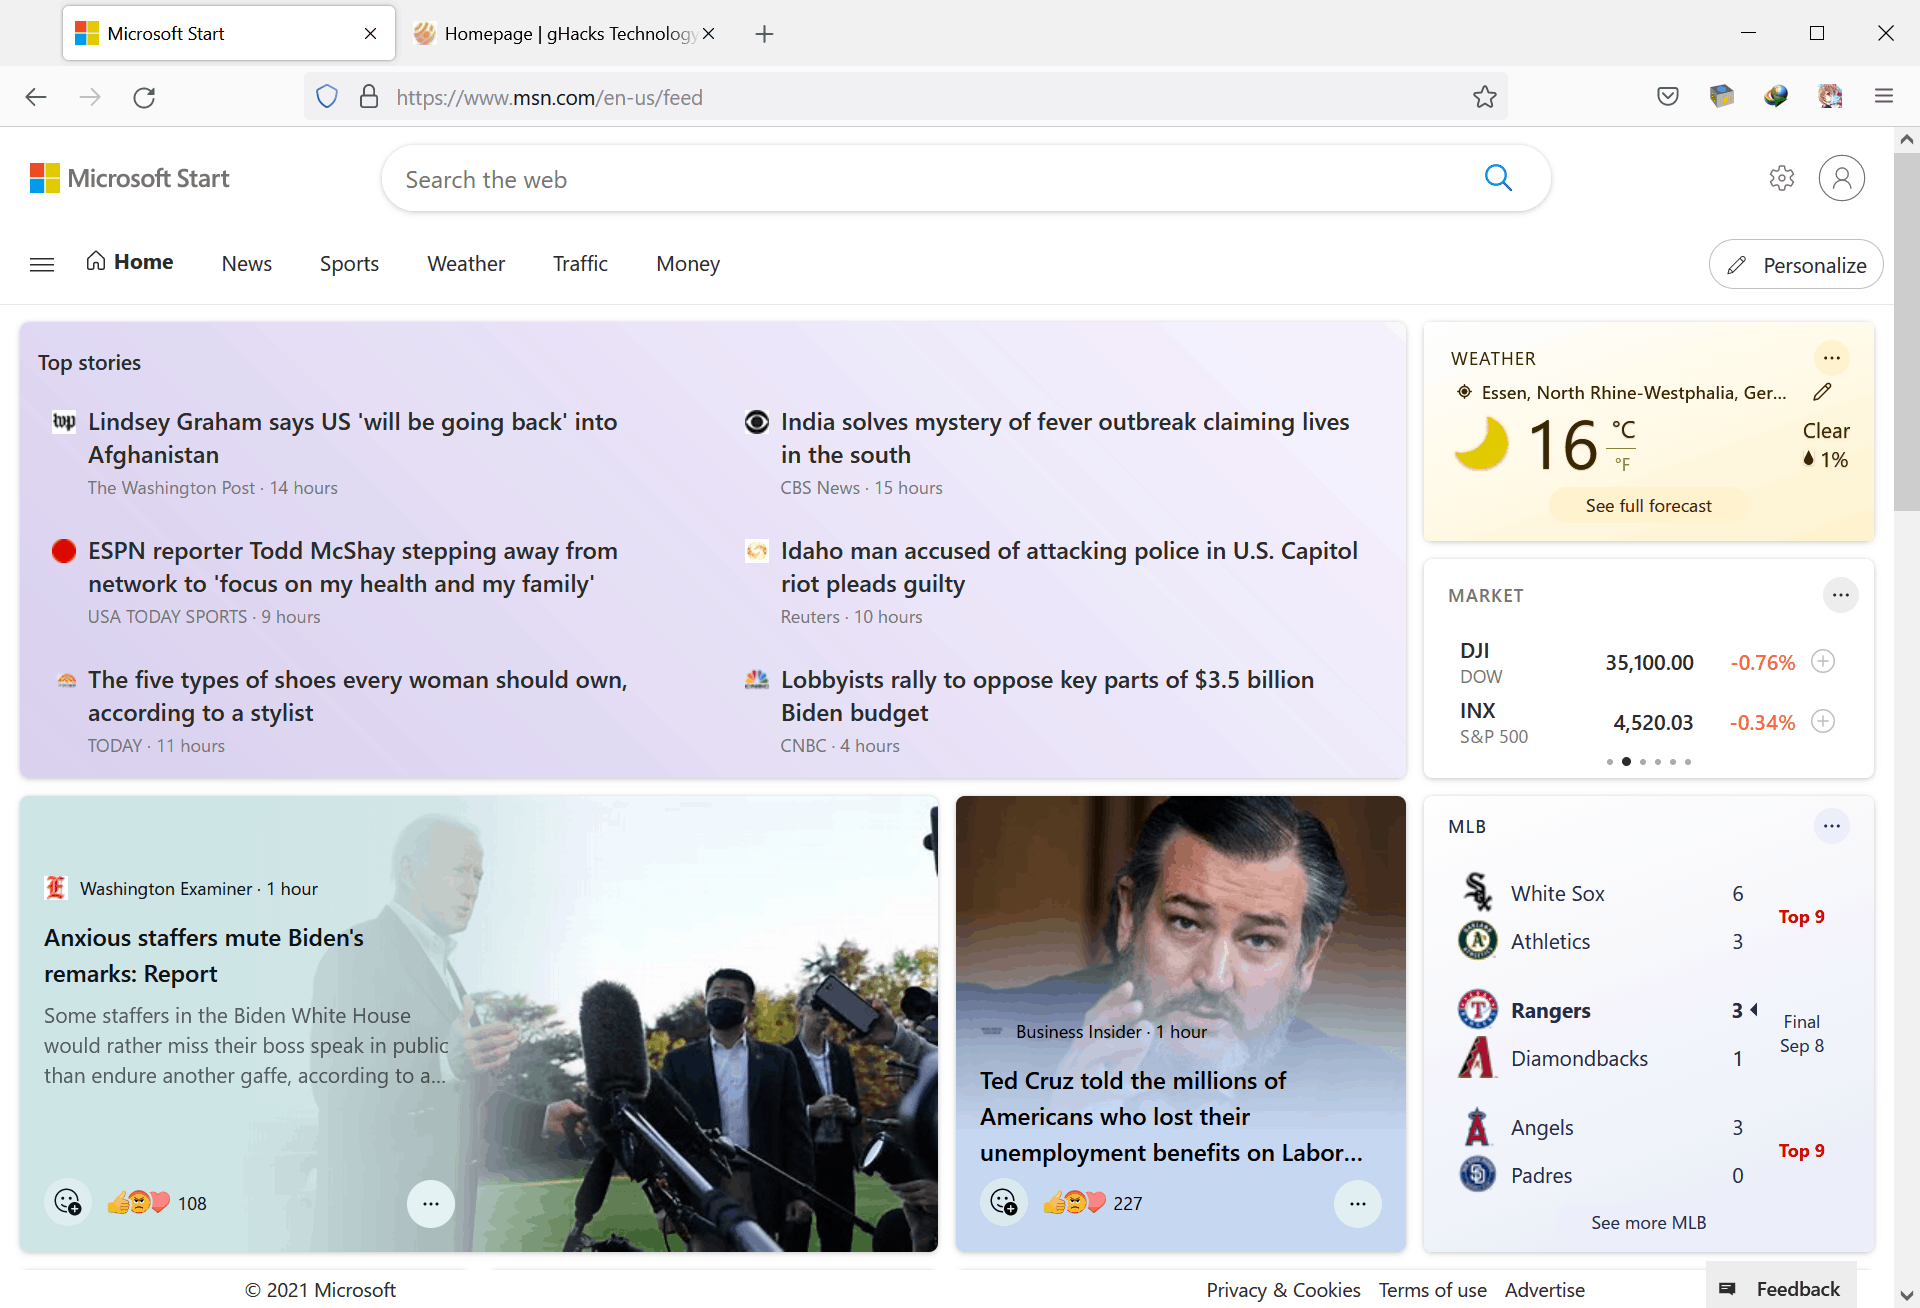 Microsoft Start: news and interests expanded to the Web and Apps